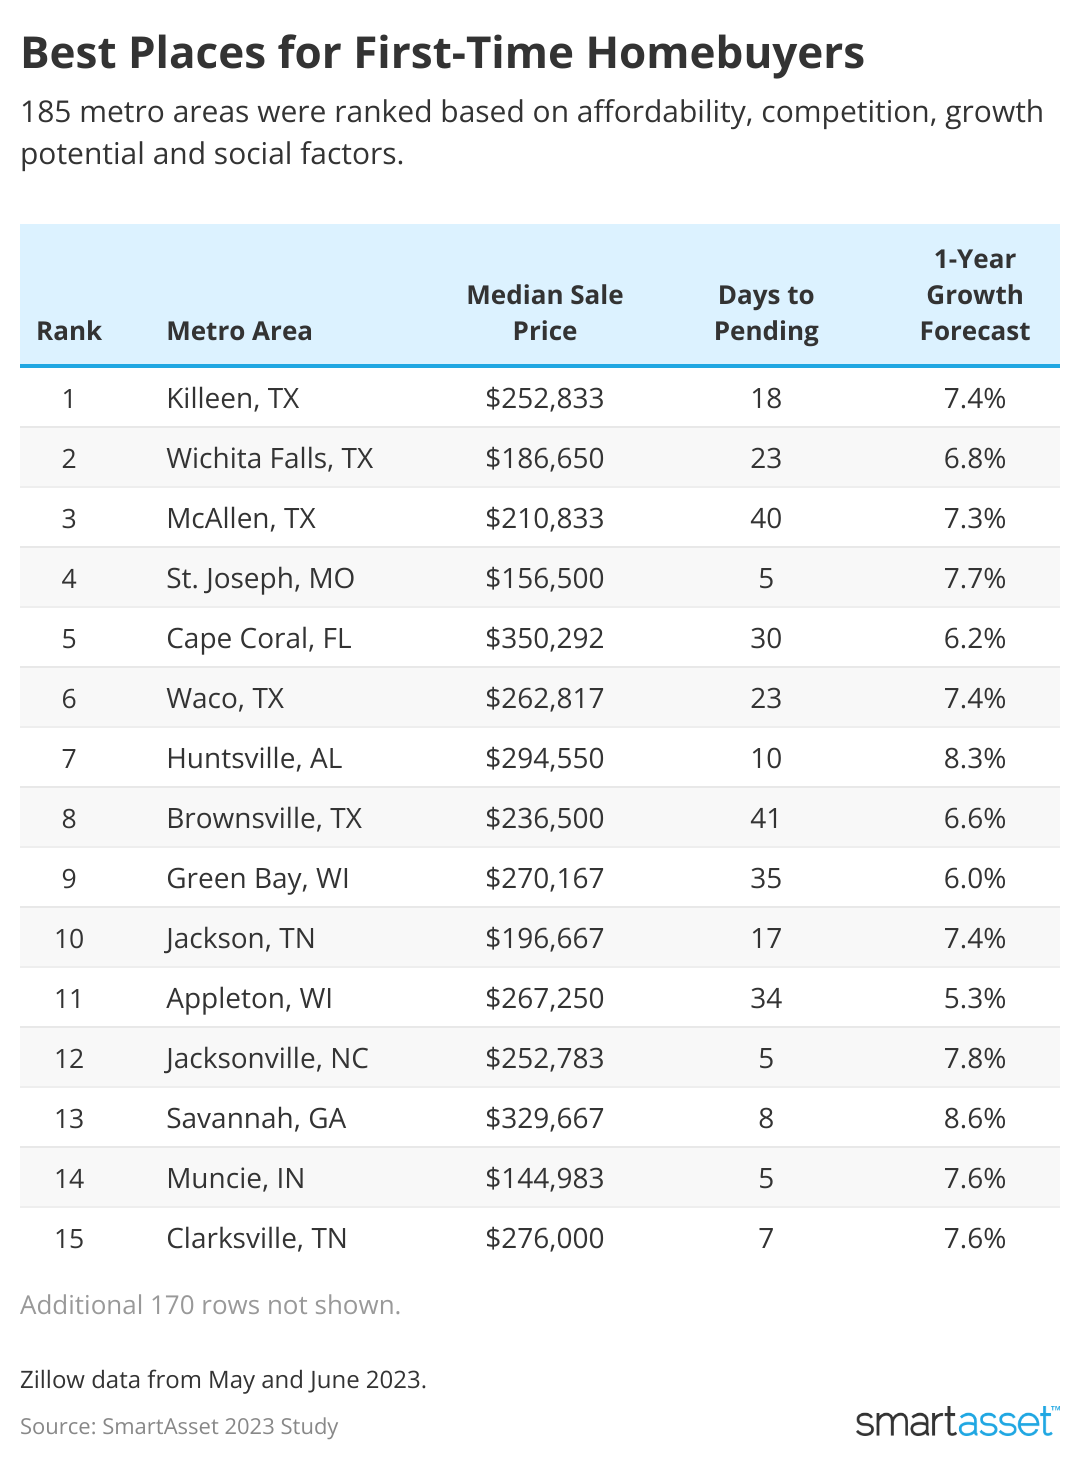 A chart showing the top 15 best places for new homebuyers